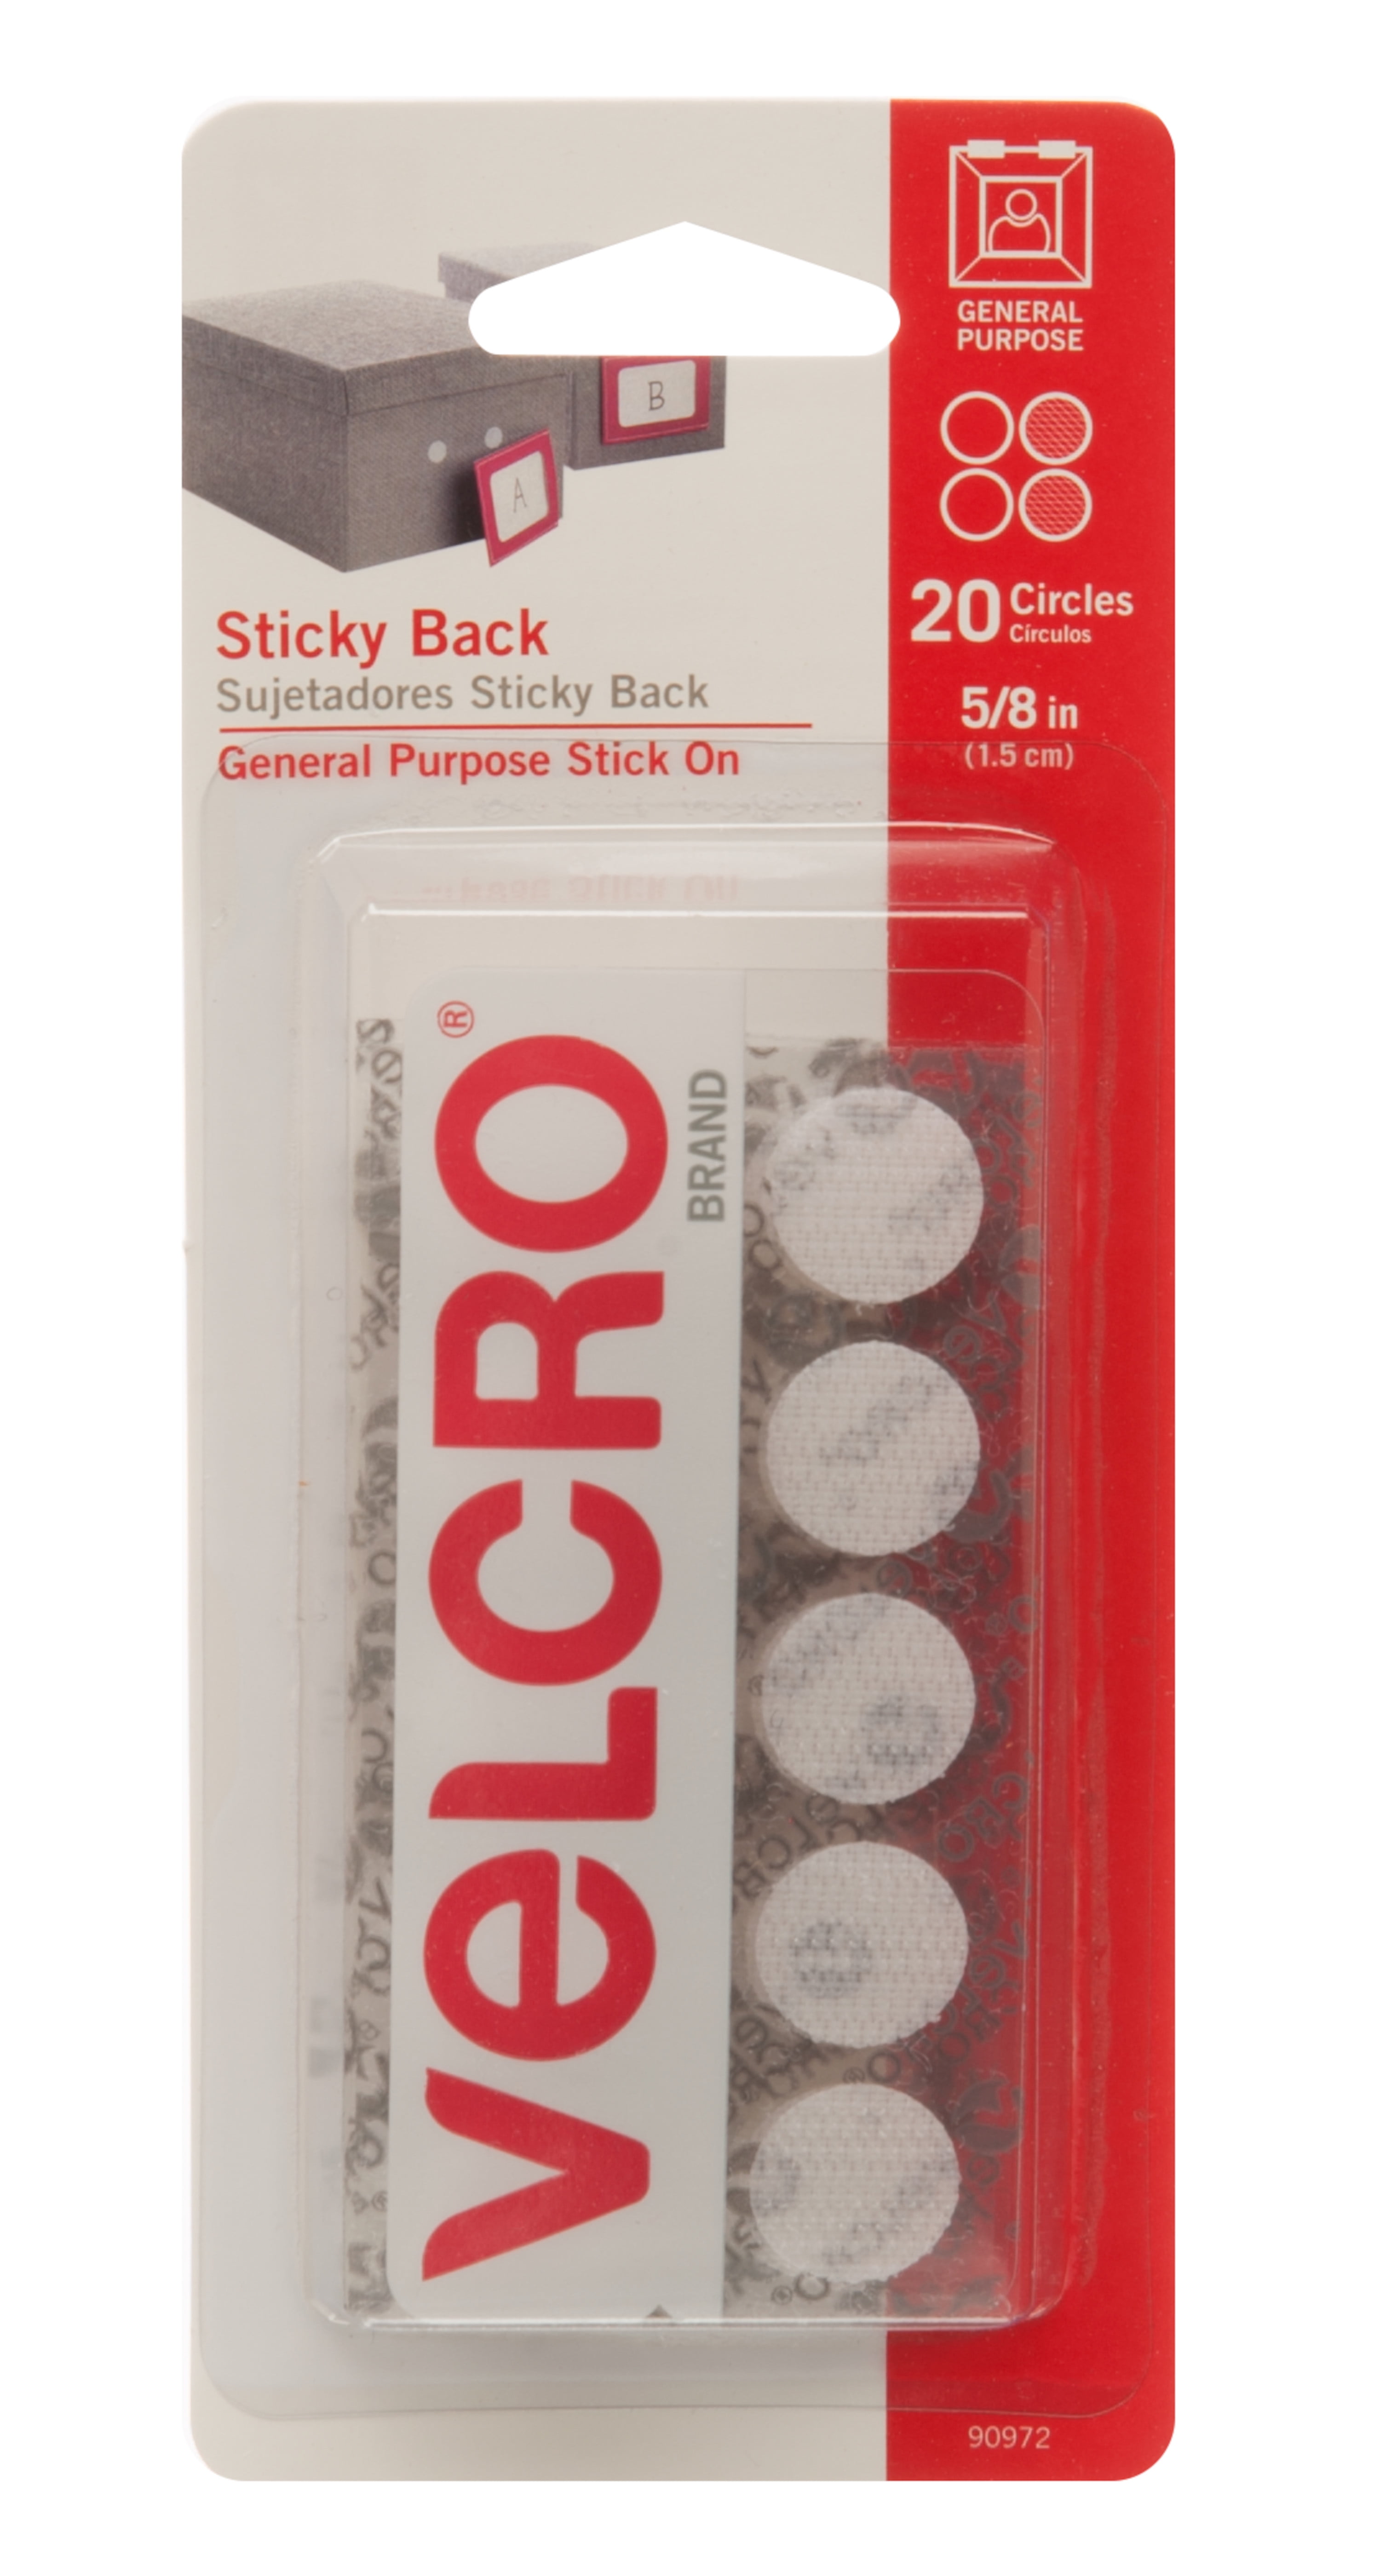 VELCRO Brand Dots with Adhesive, Sticky Back Round Dominican Republic